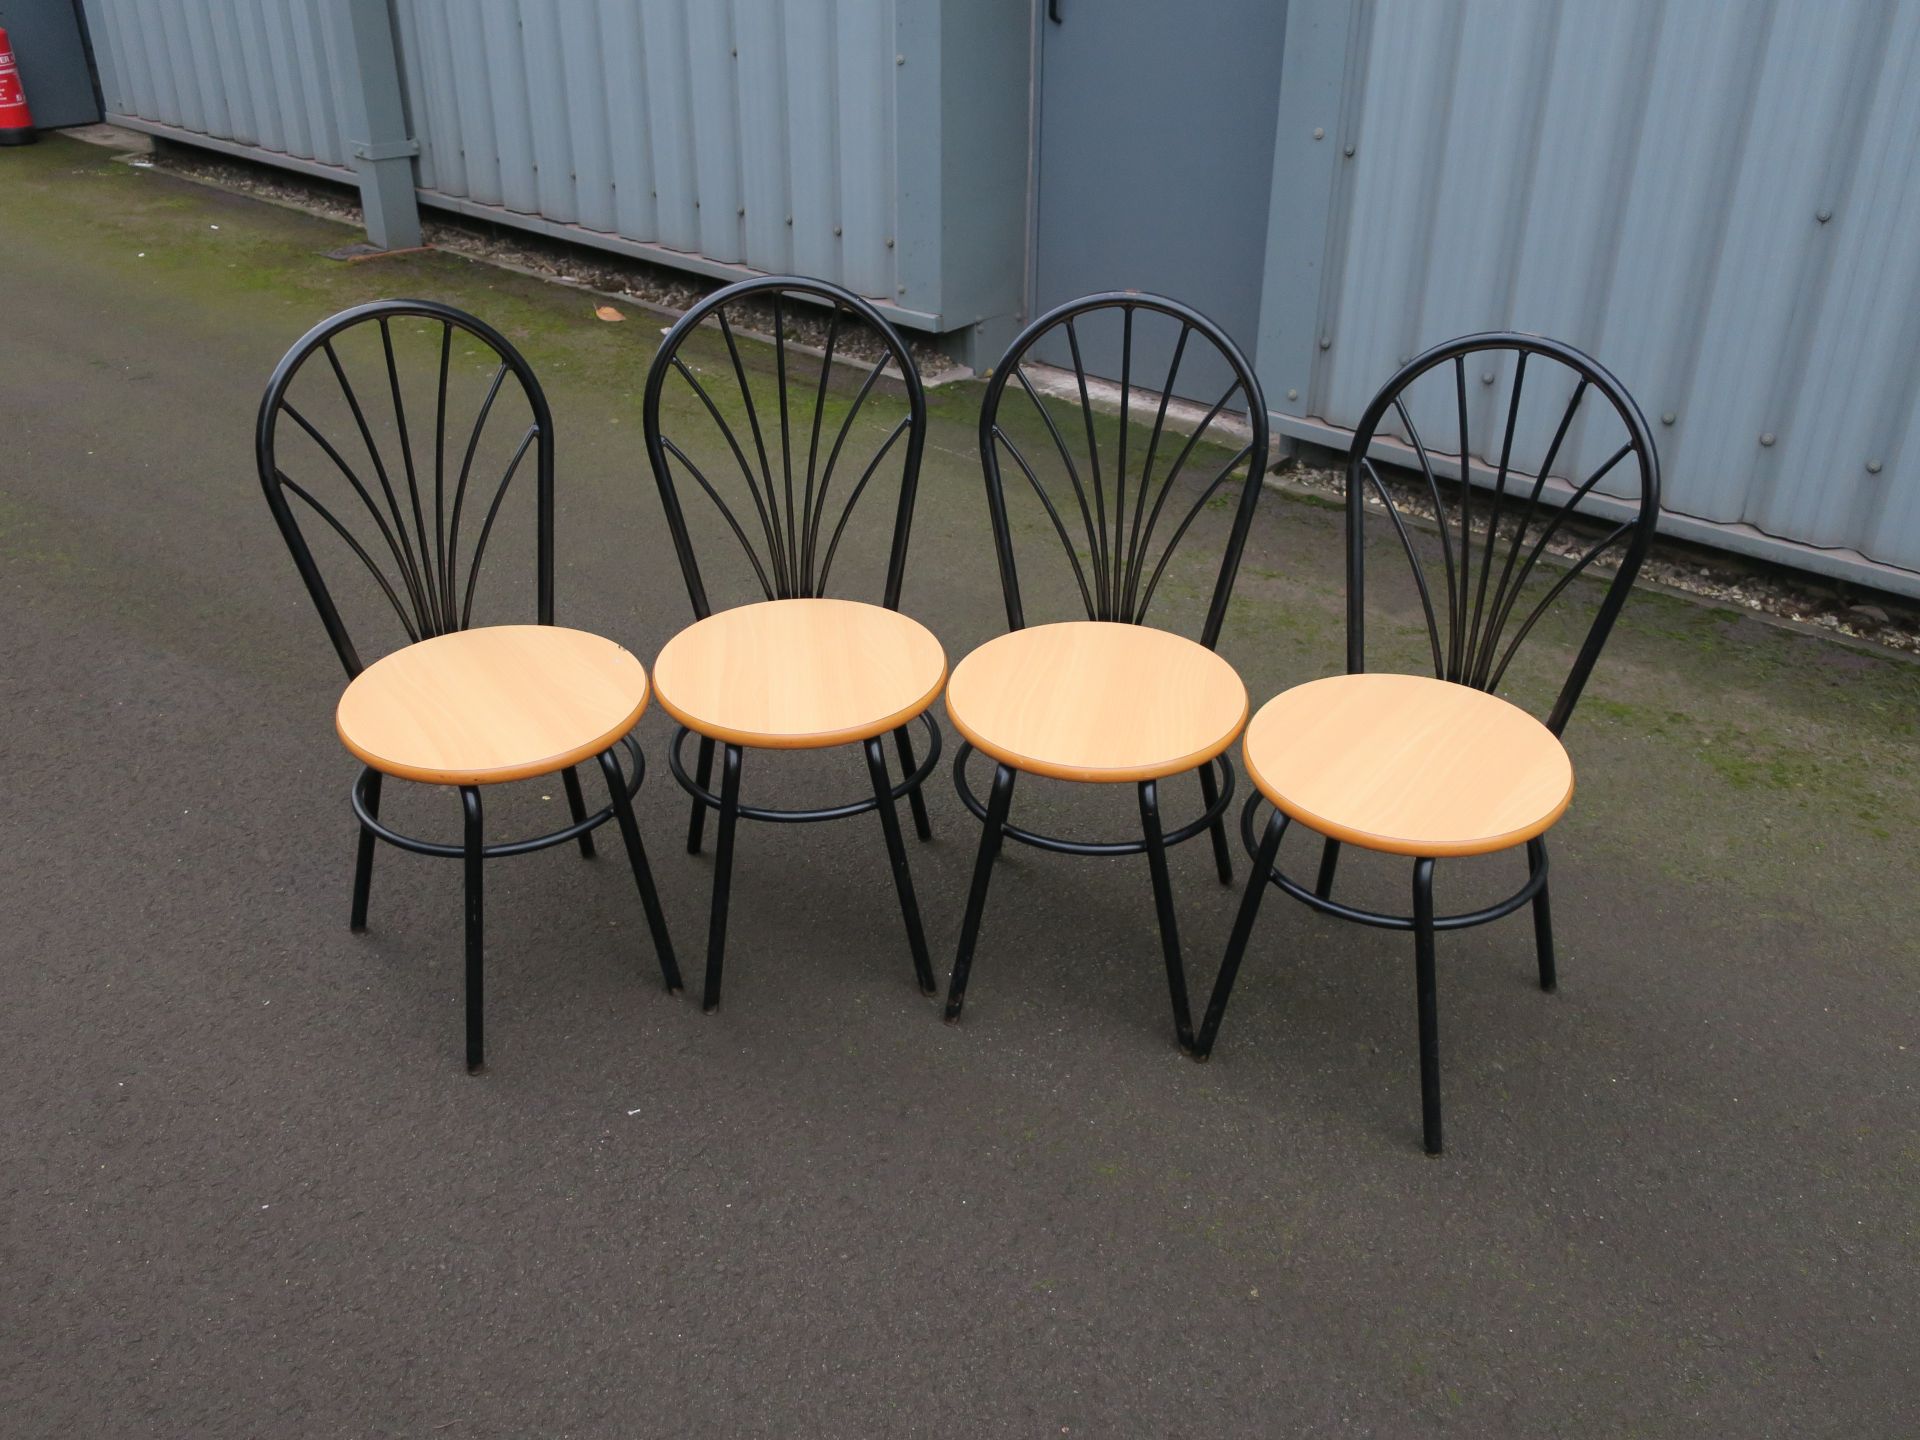 * 4 x Black metal framed chairs with wooden seats. Picture for illustration purposes only.